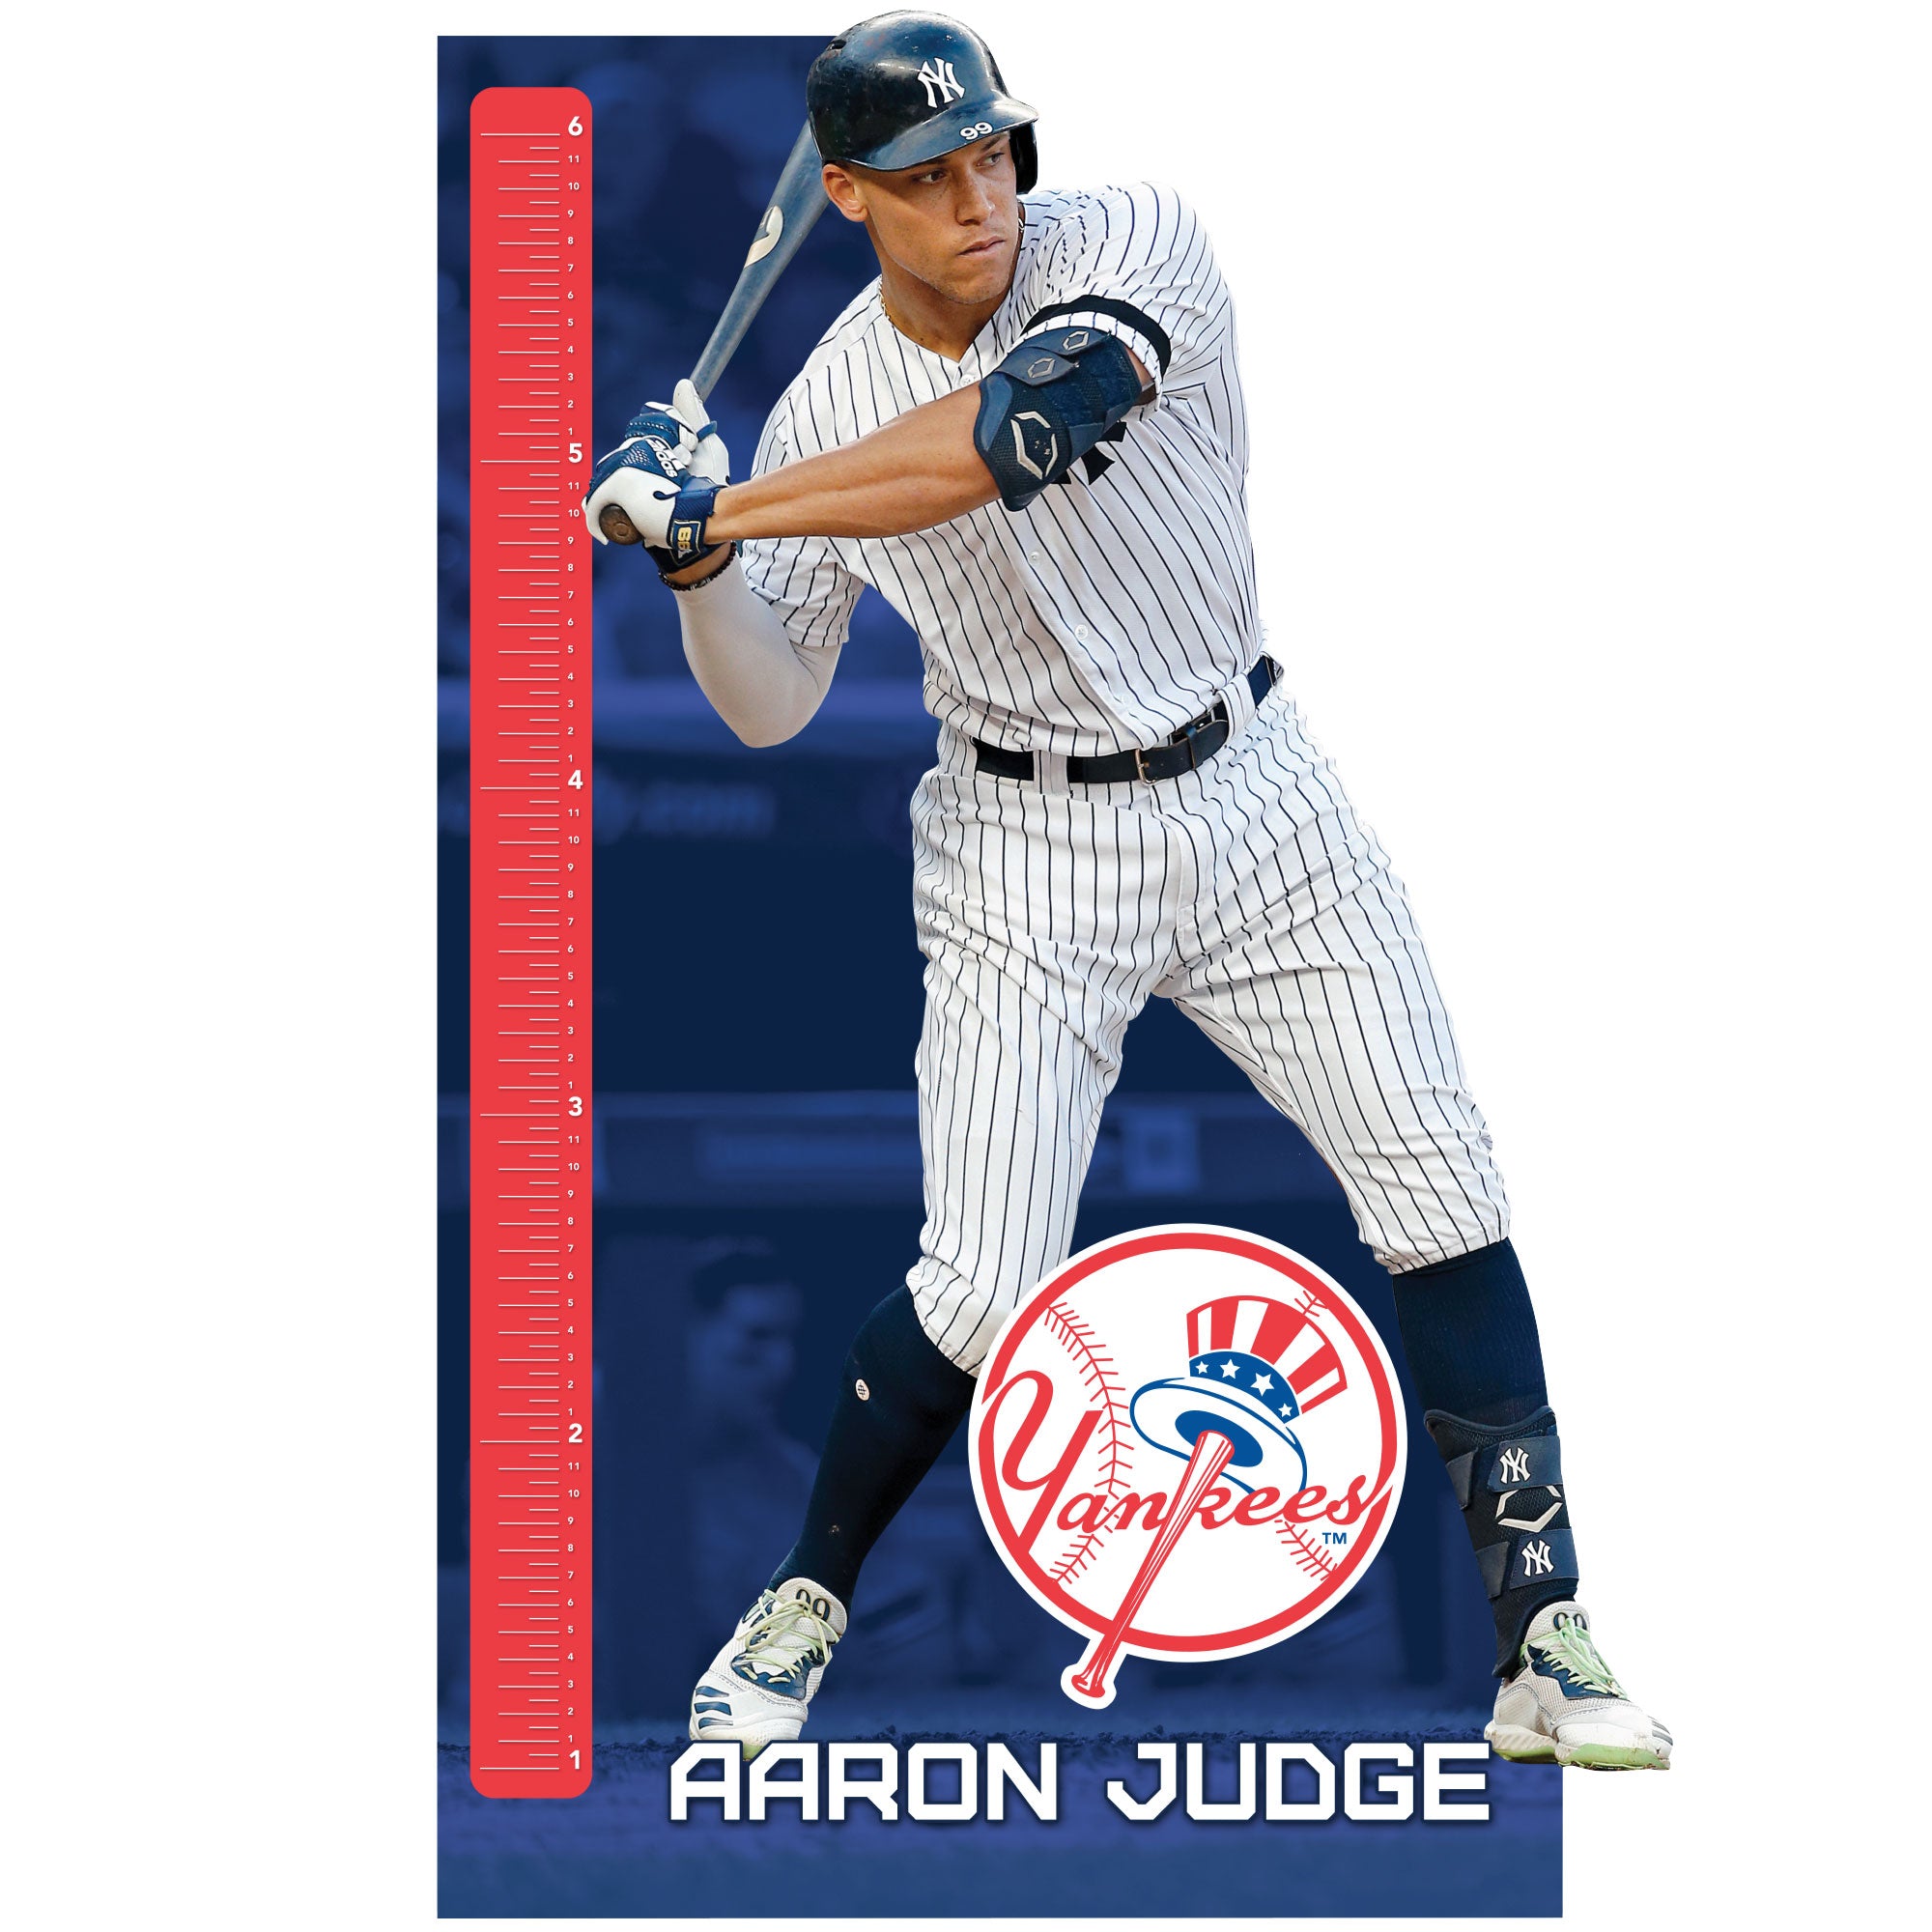 New York Yankees: Aaron Judge 2021 Growth Chart - MLB Removable Wall Adhesive Wall Decal Life-Size 45W x 70H